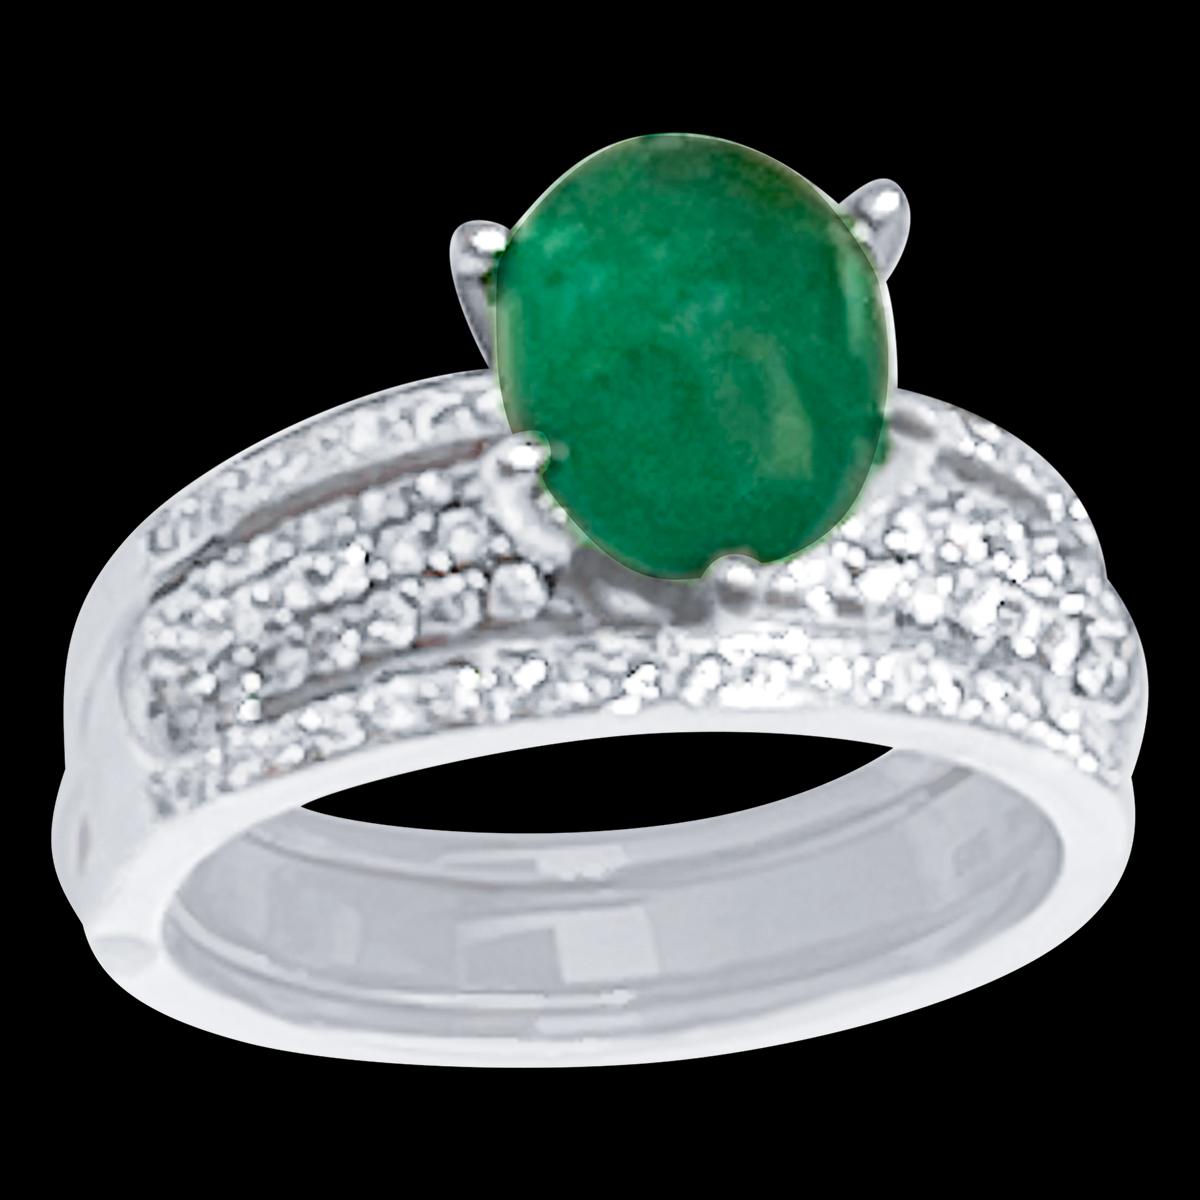 2 Carat Zambian Emerald Cabochon & Diamond Cocktail  Ring 14 Kt Gold with Band In Excellent Condition For Sale In New York, NY